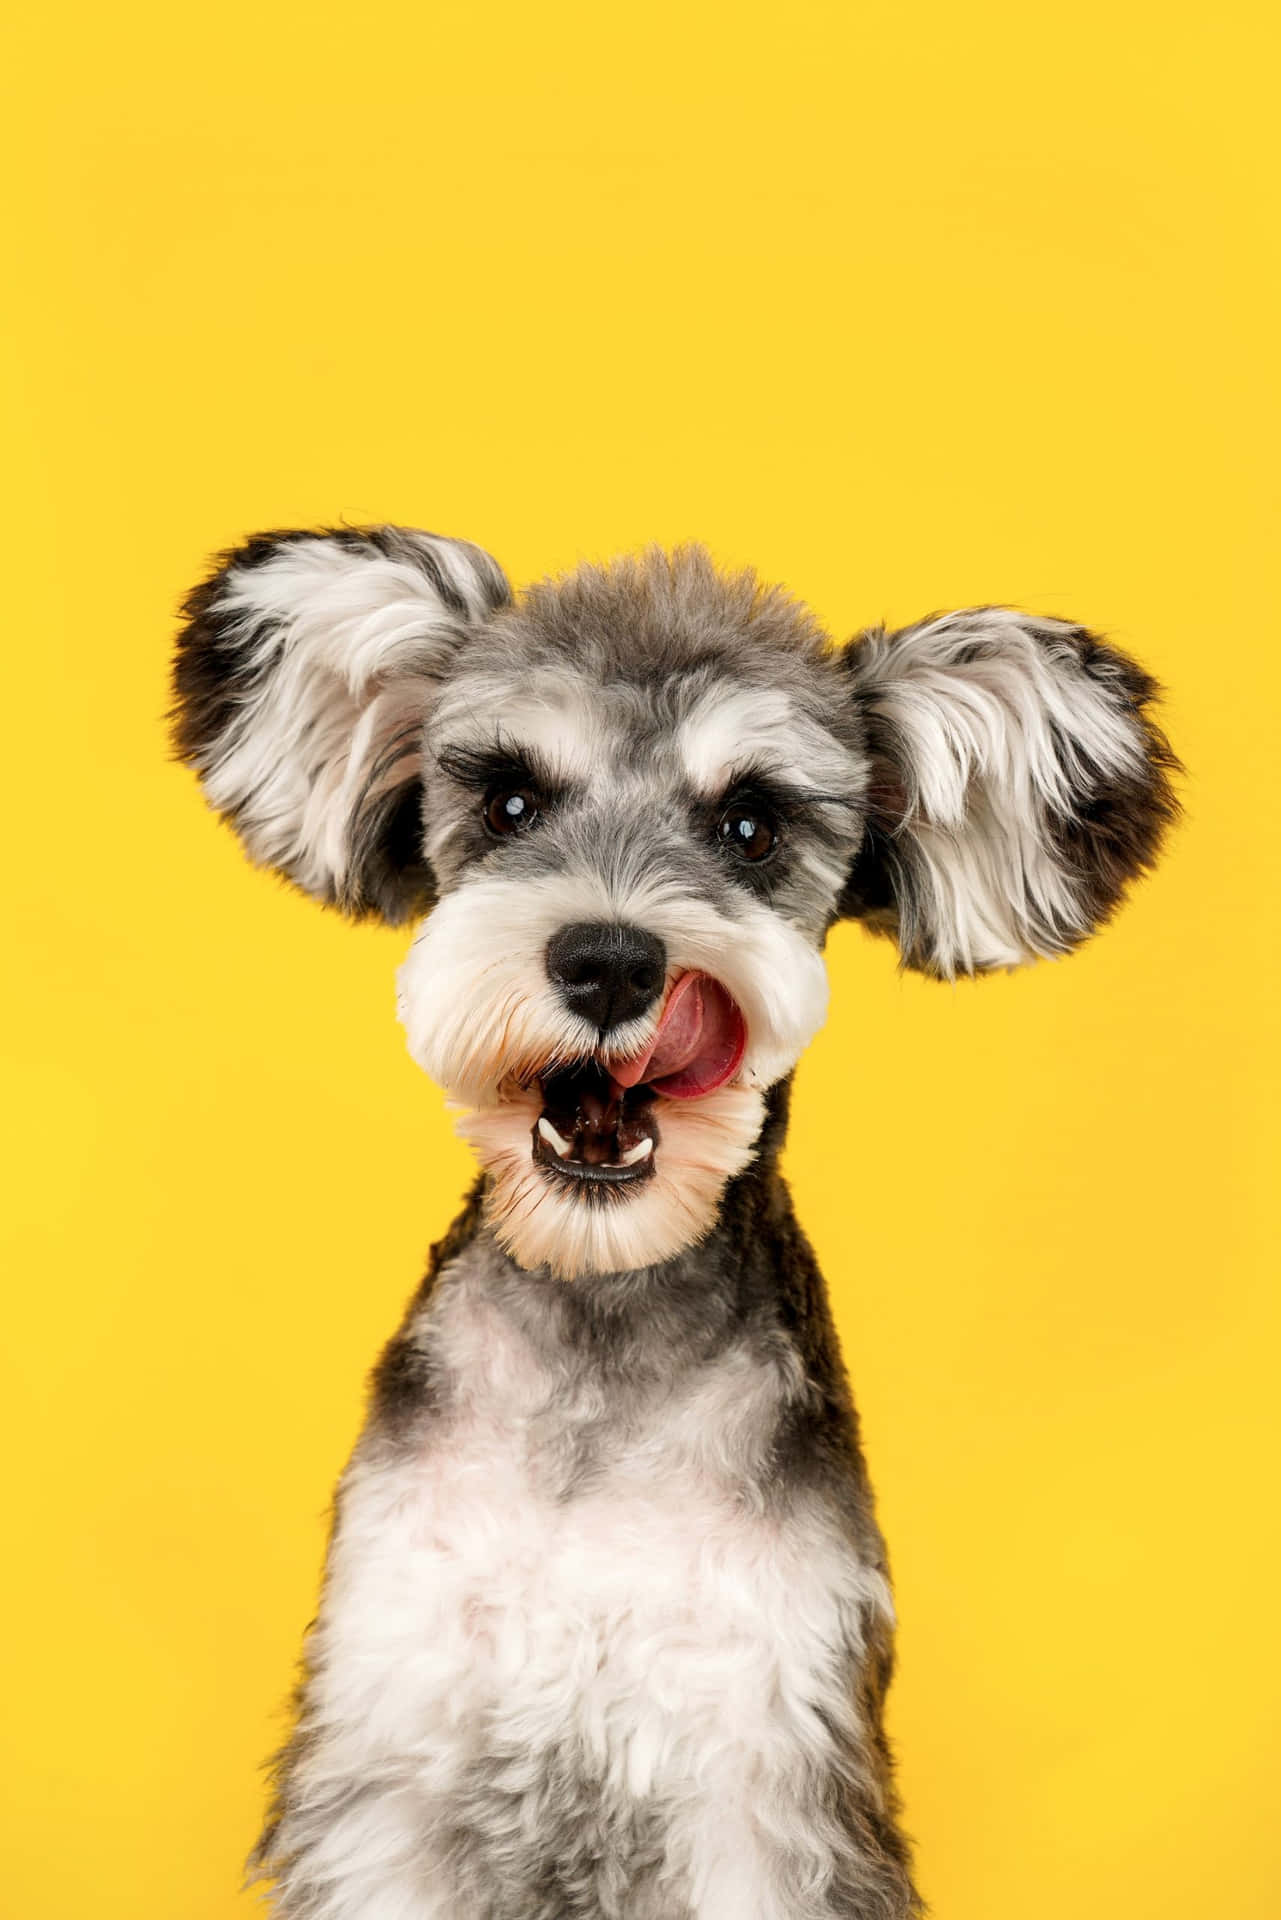 A Dog With Its Tongue Out On A Yellow Background